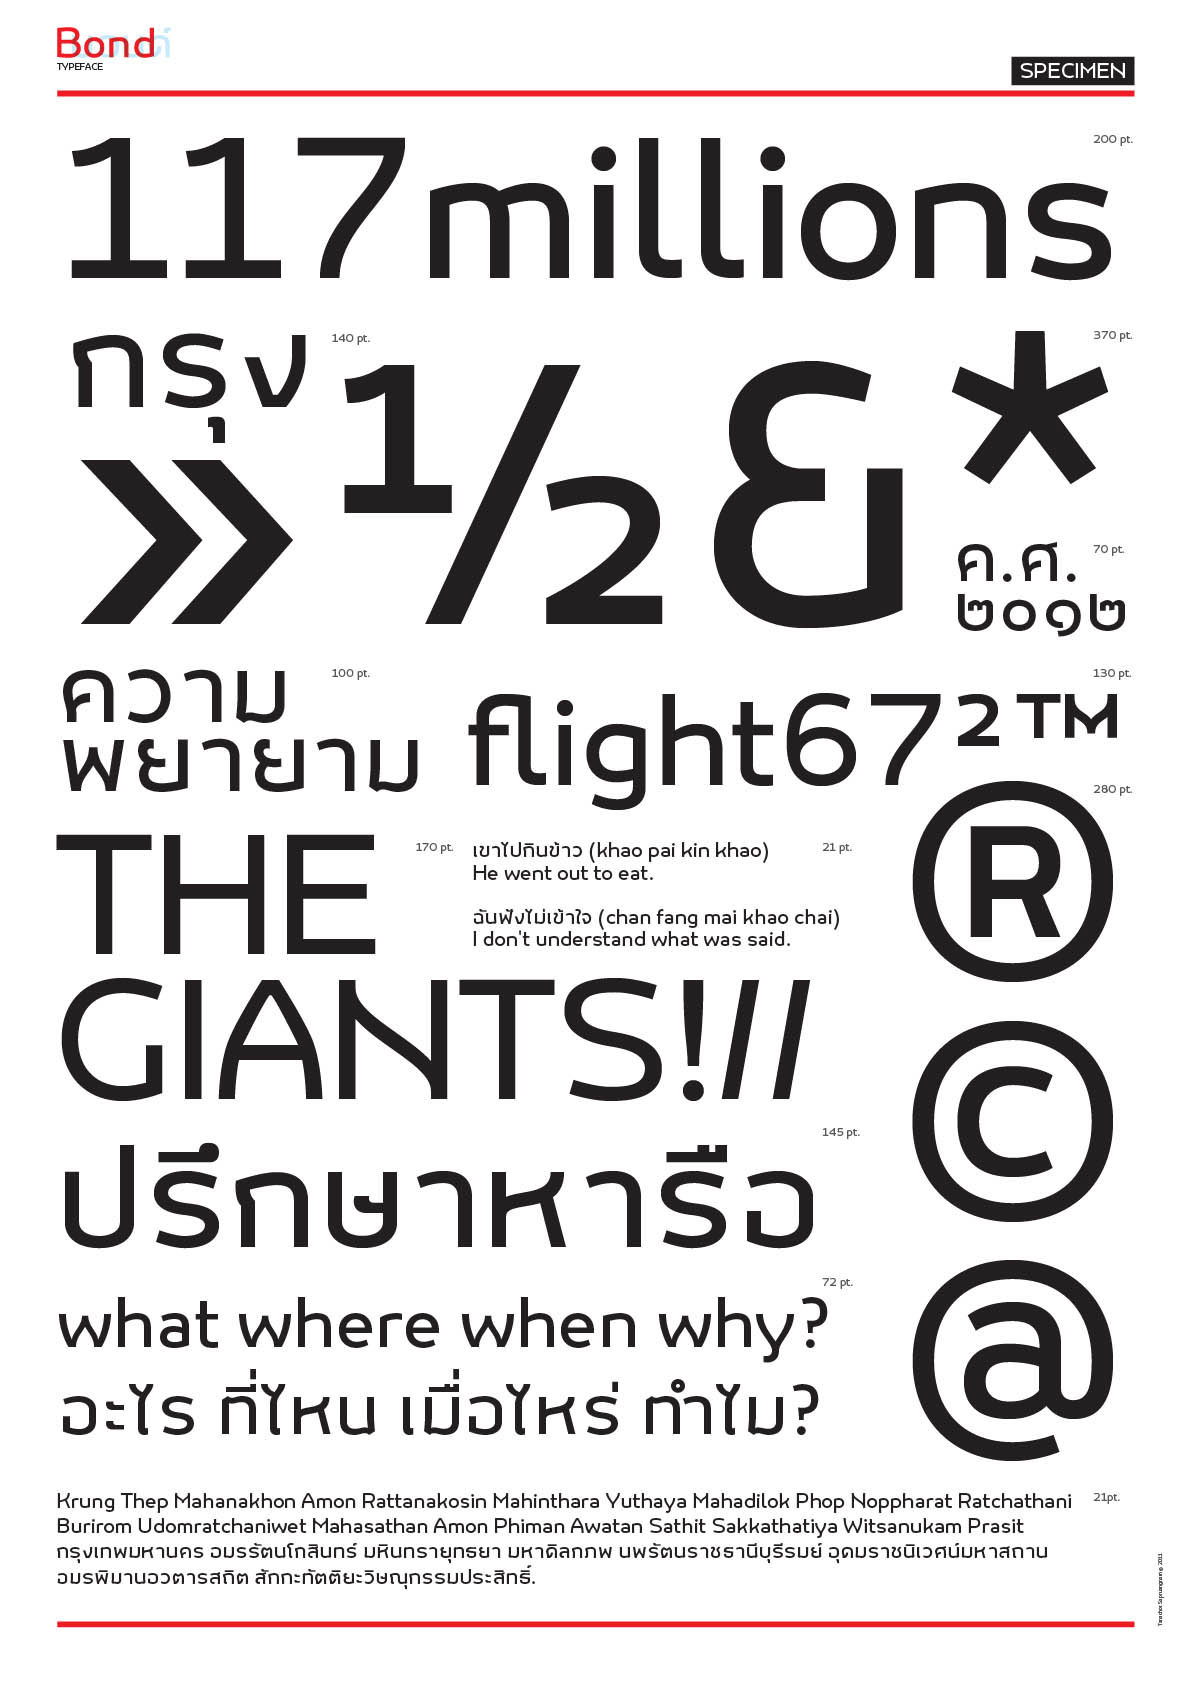 Typeface design and promotional material for Bond